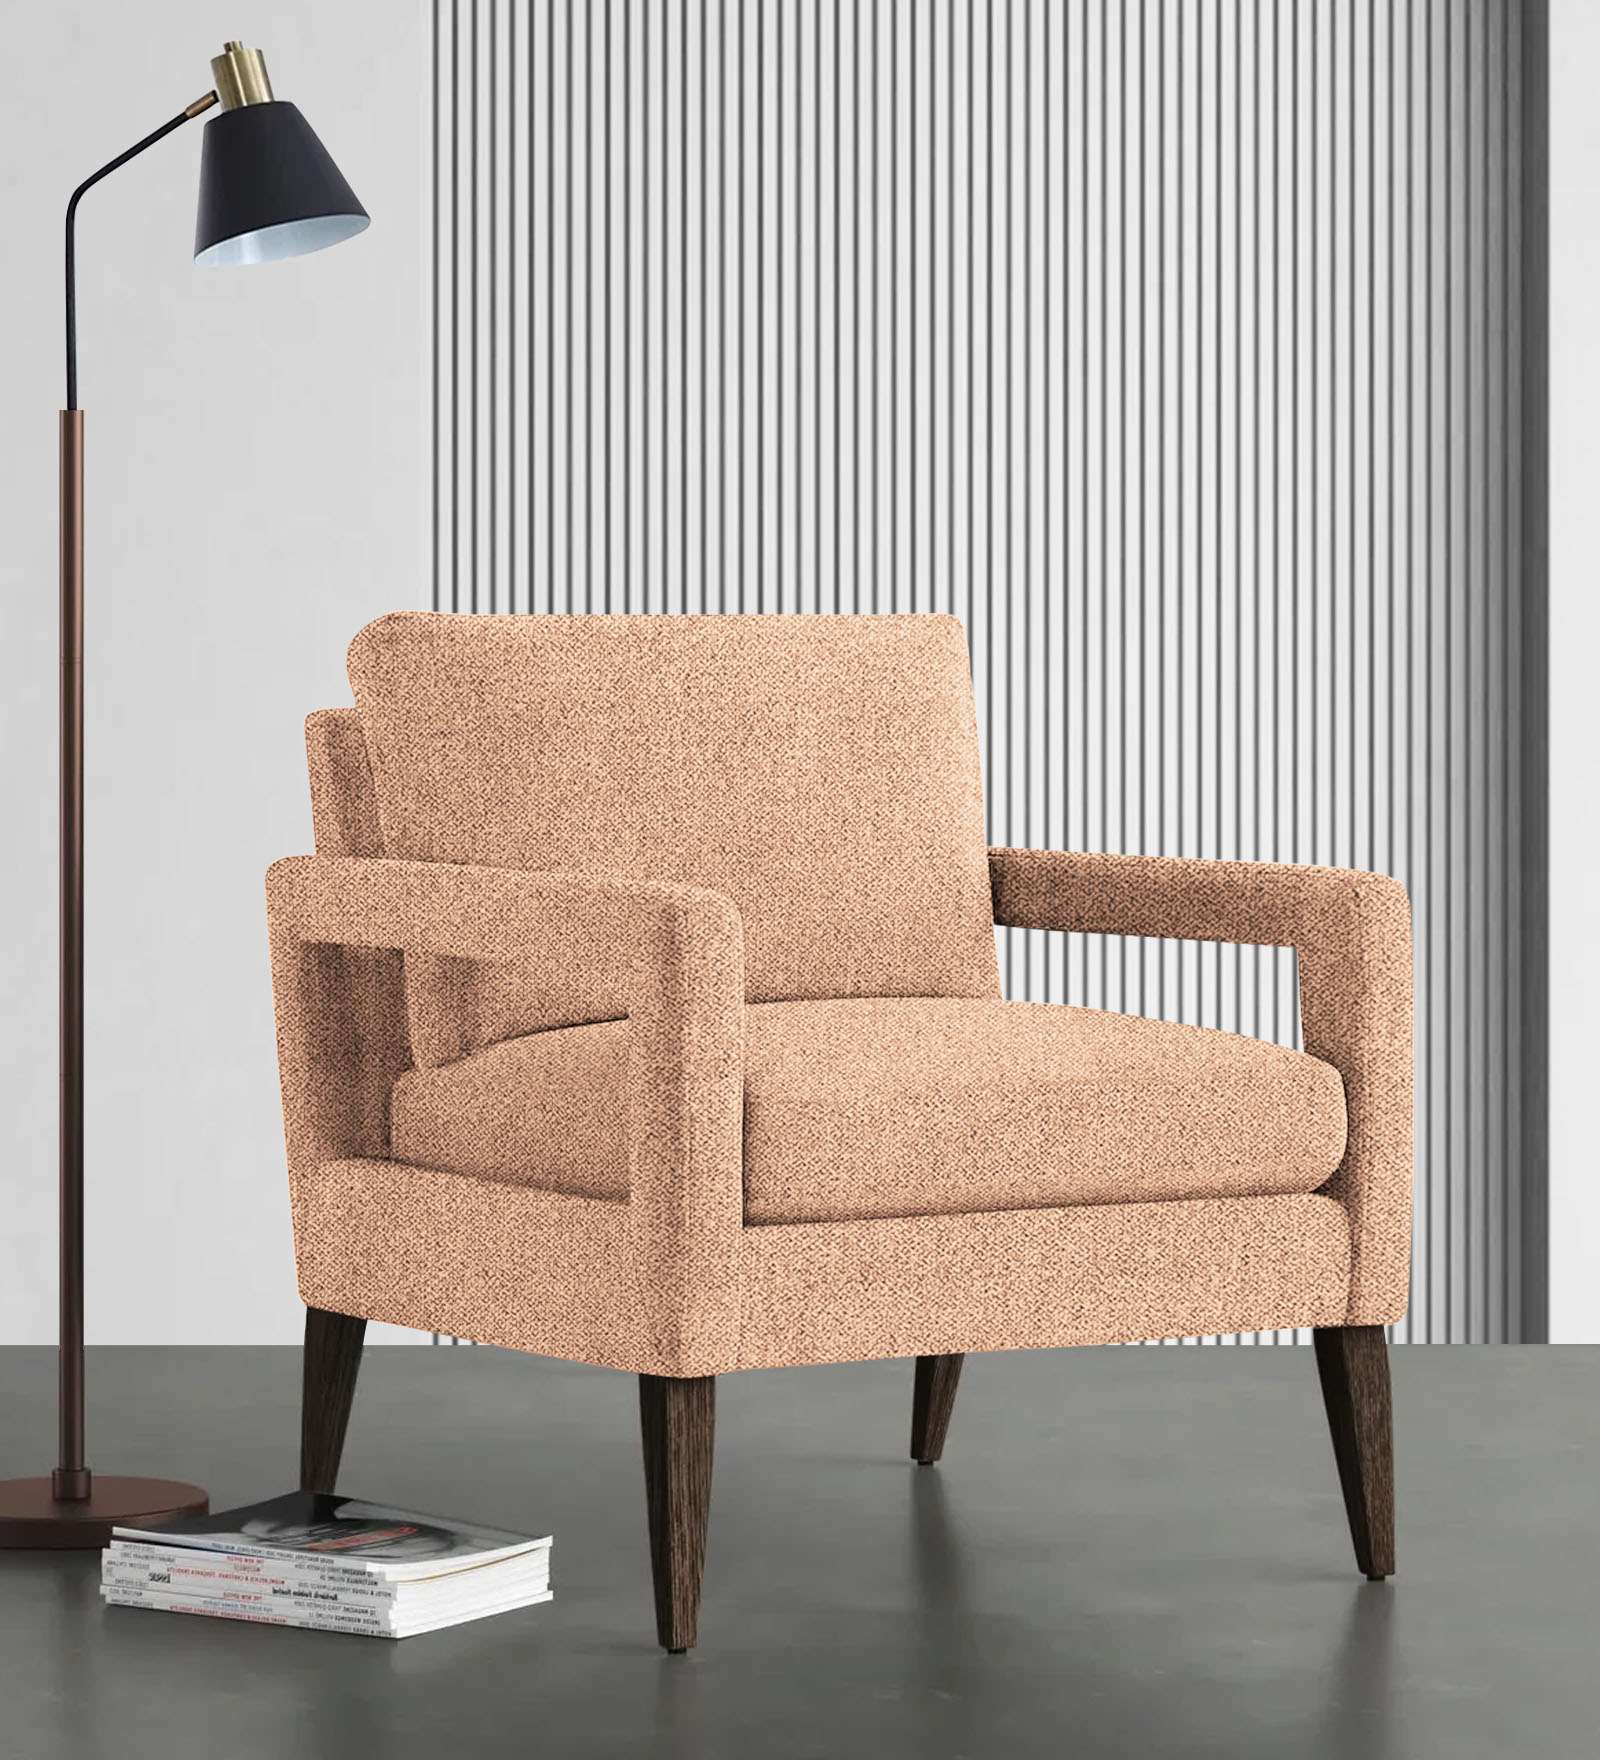 Olsen Fabric Arm Chair in cosmic-beige Colour